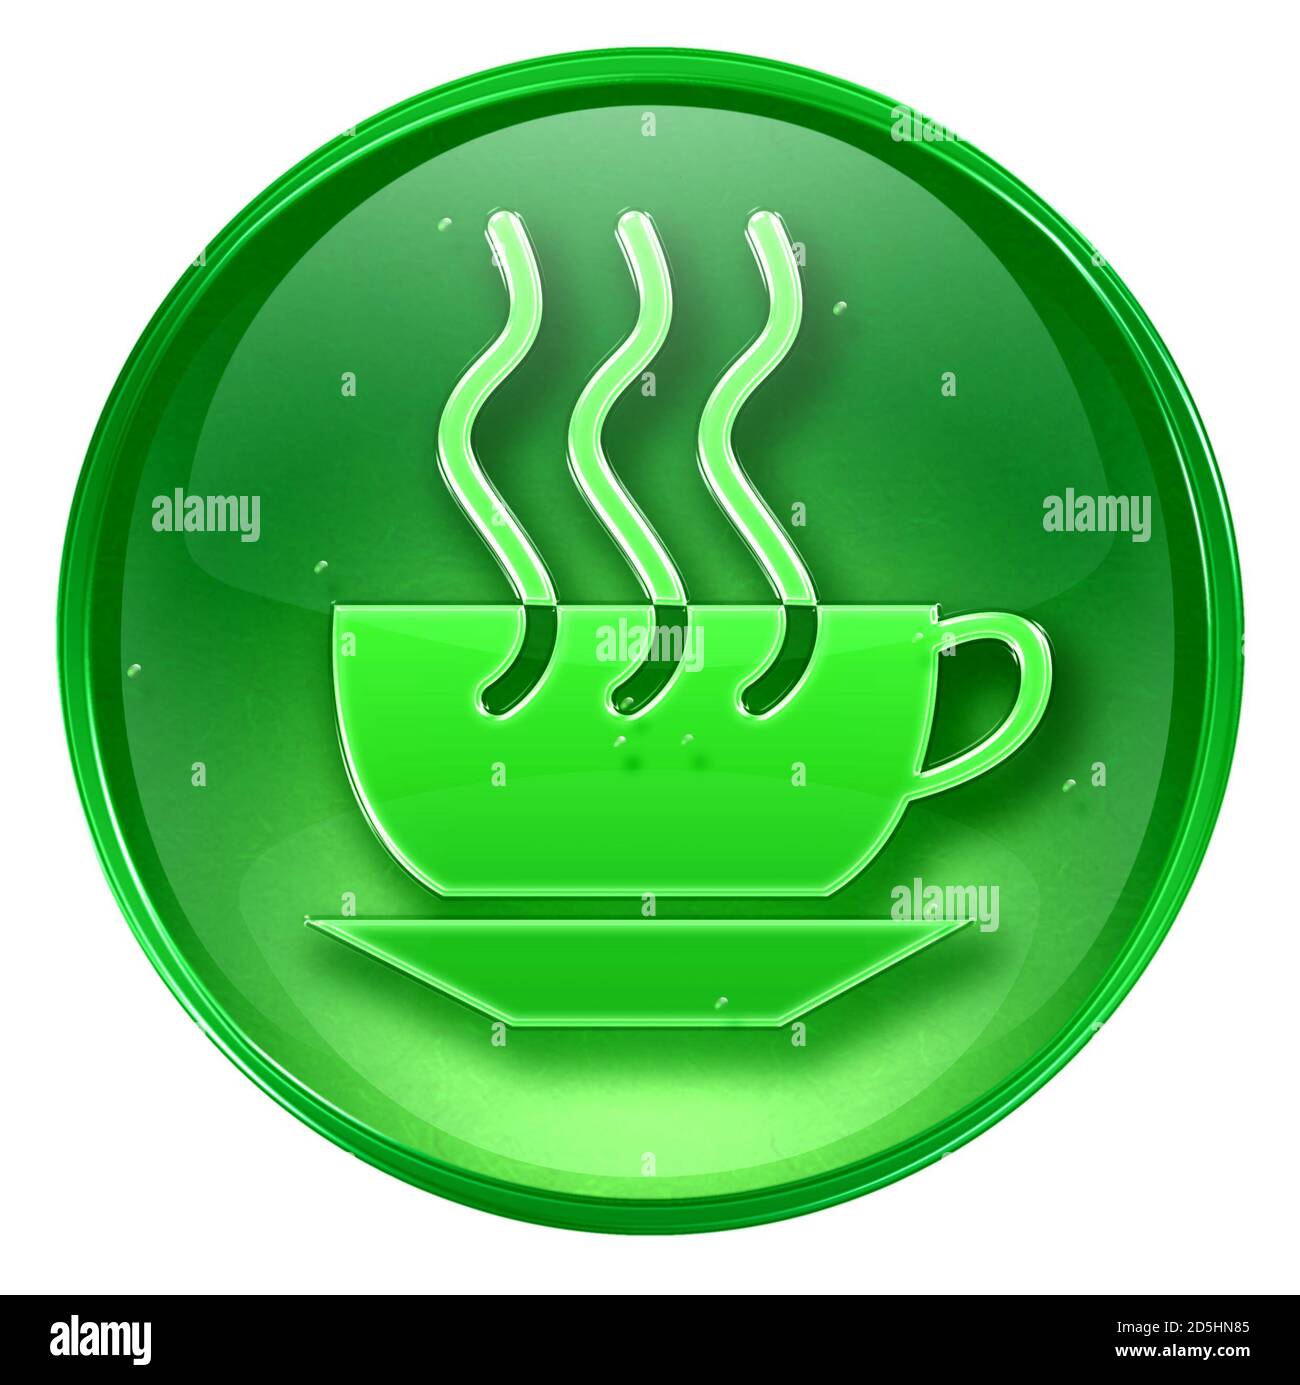 Coffee cup icon green, isolated on white background. Stock Photo